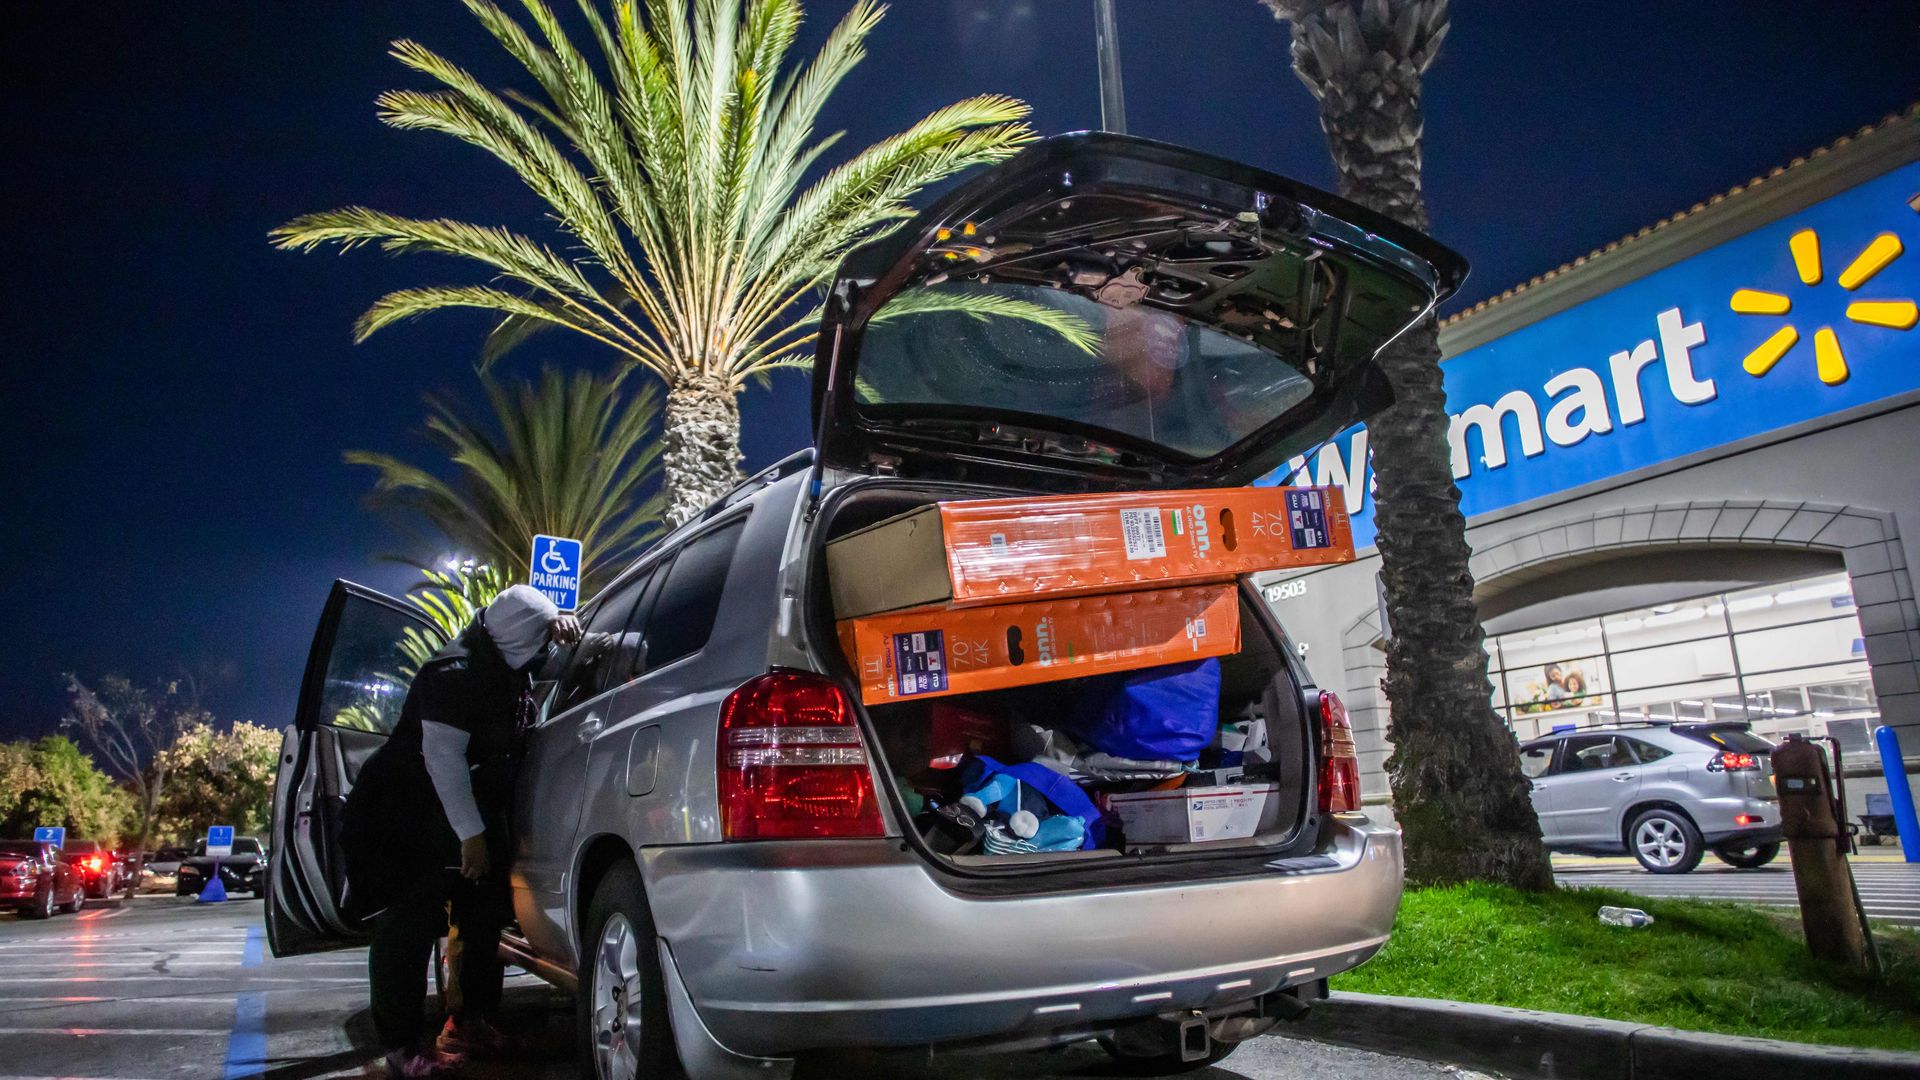   A car trunk in a Walmart parking lot is loaded with two television sets and other items following Black Friday shopping on November 26, 2021 in Torrance, California. 